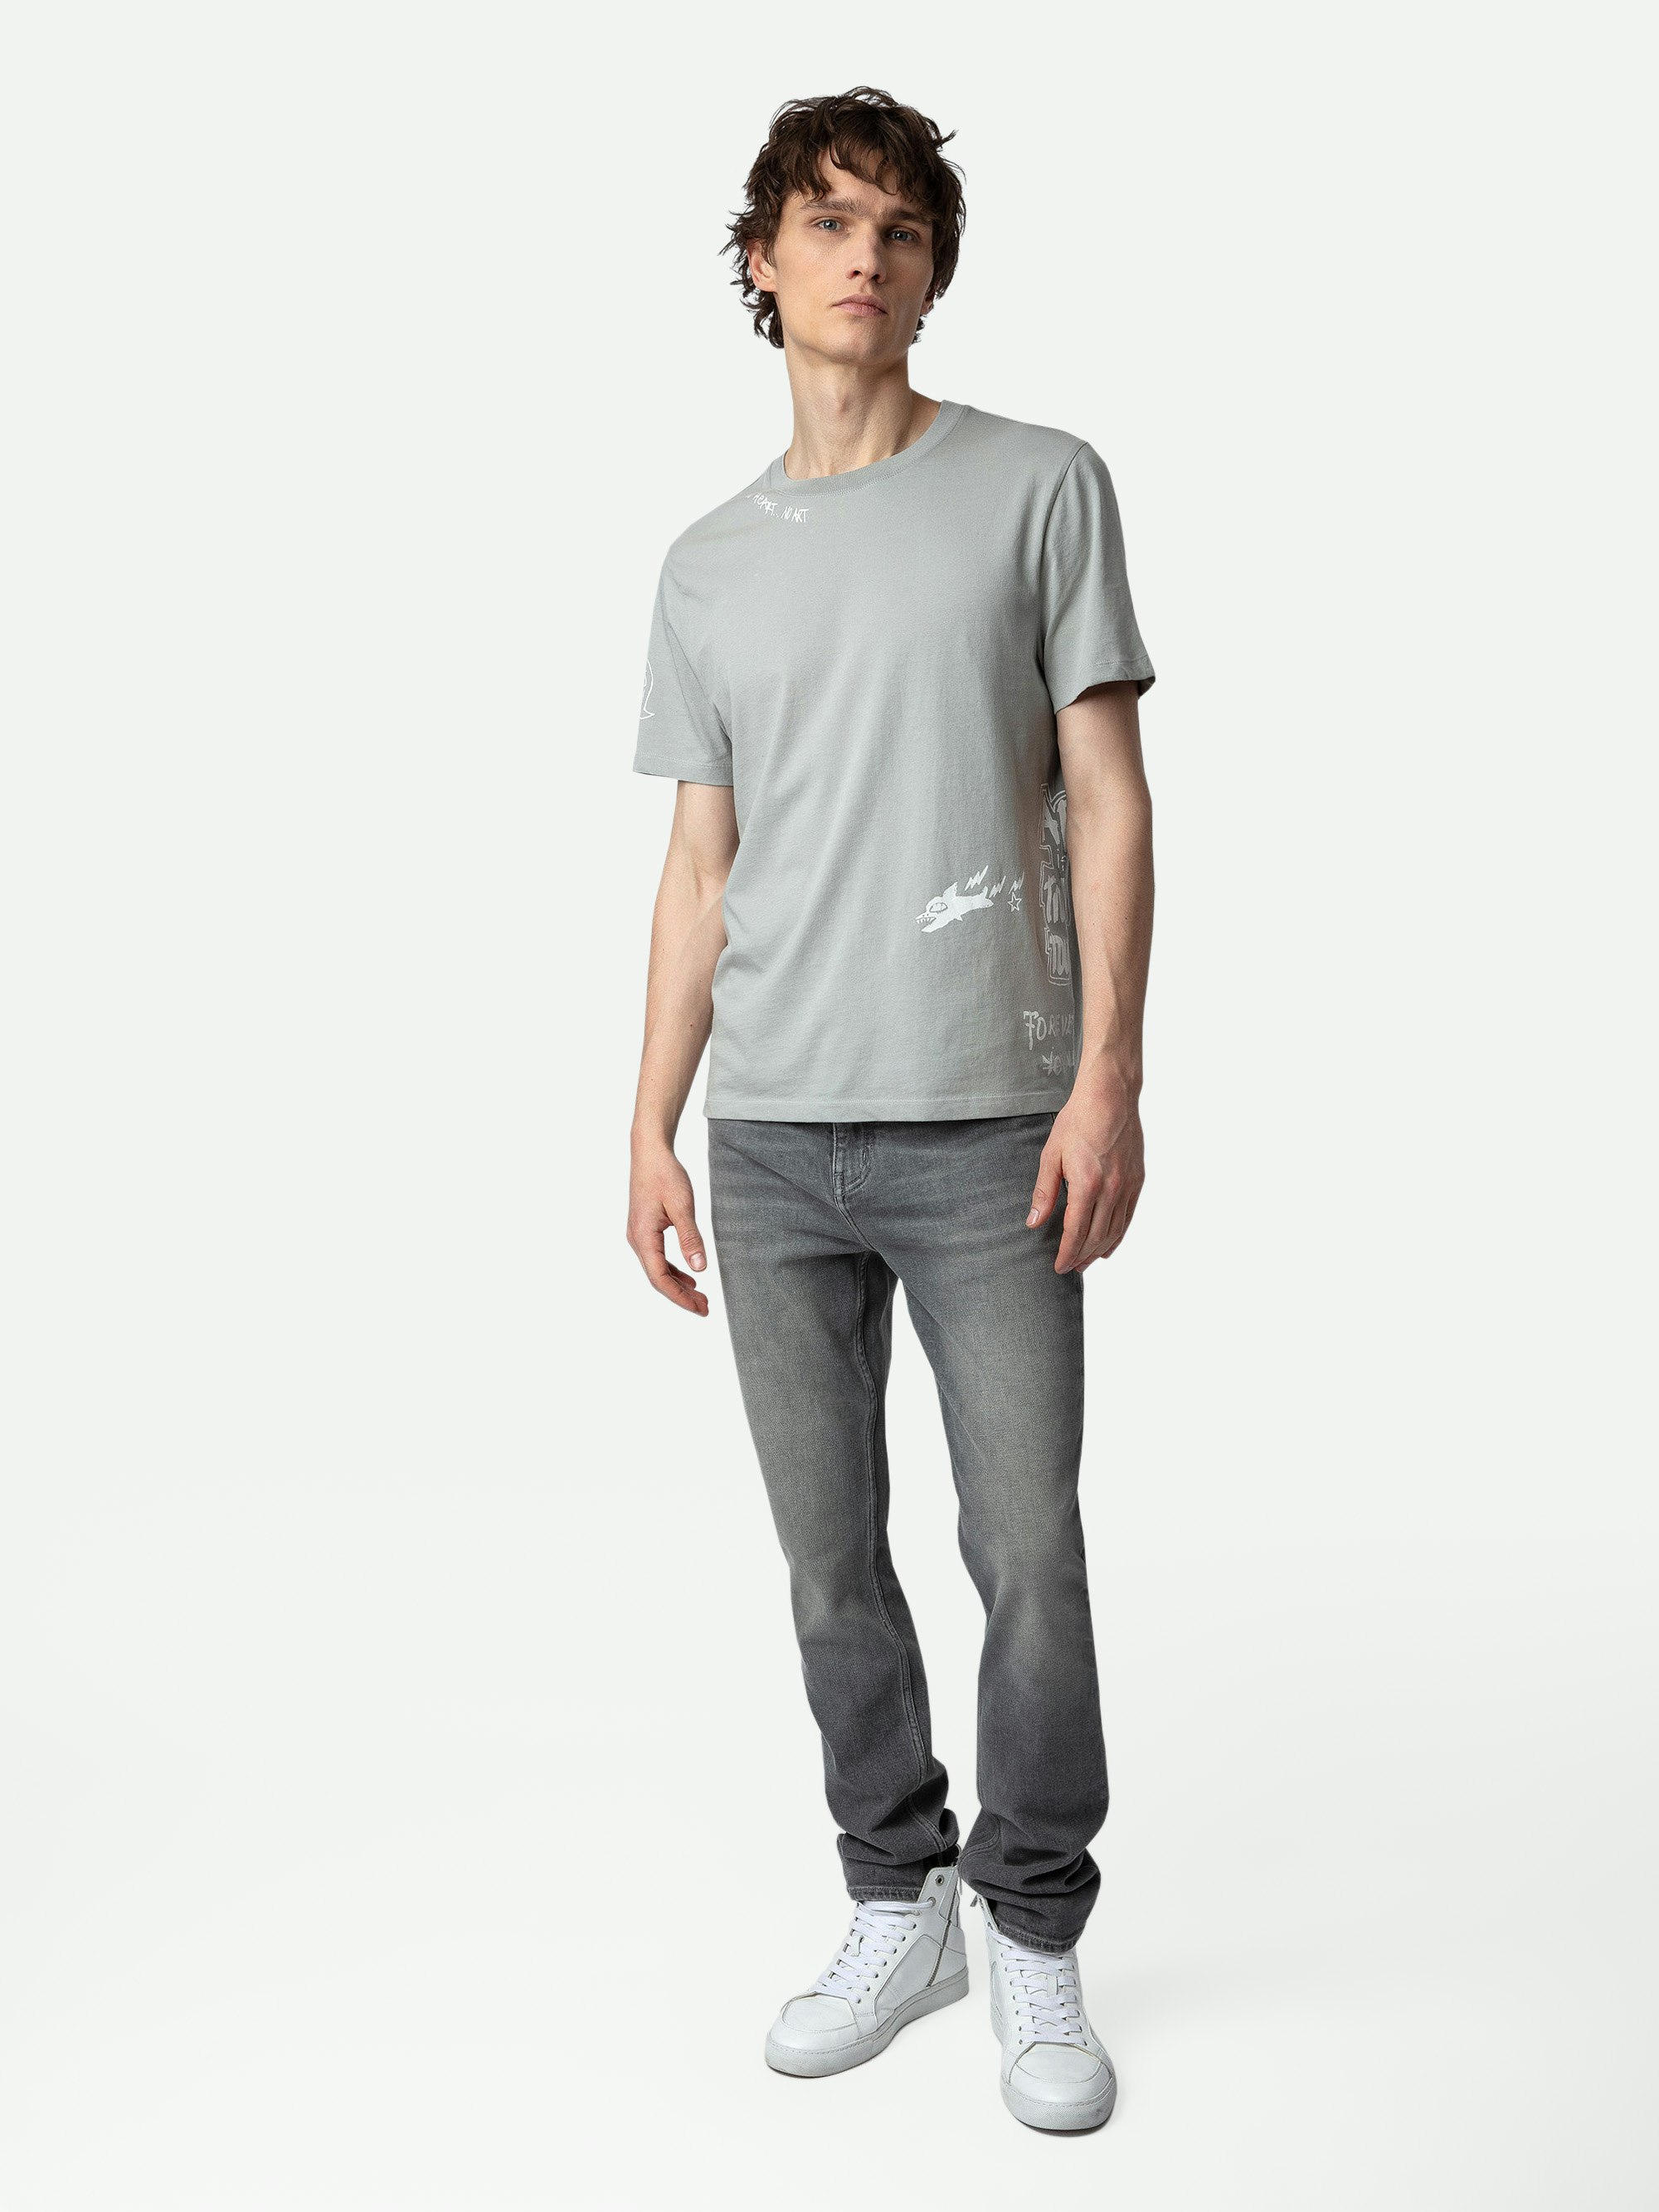 Ted Tag T-shirt - Grey organic cotton T-shirt with customized details designed by Humberto Cruz.